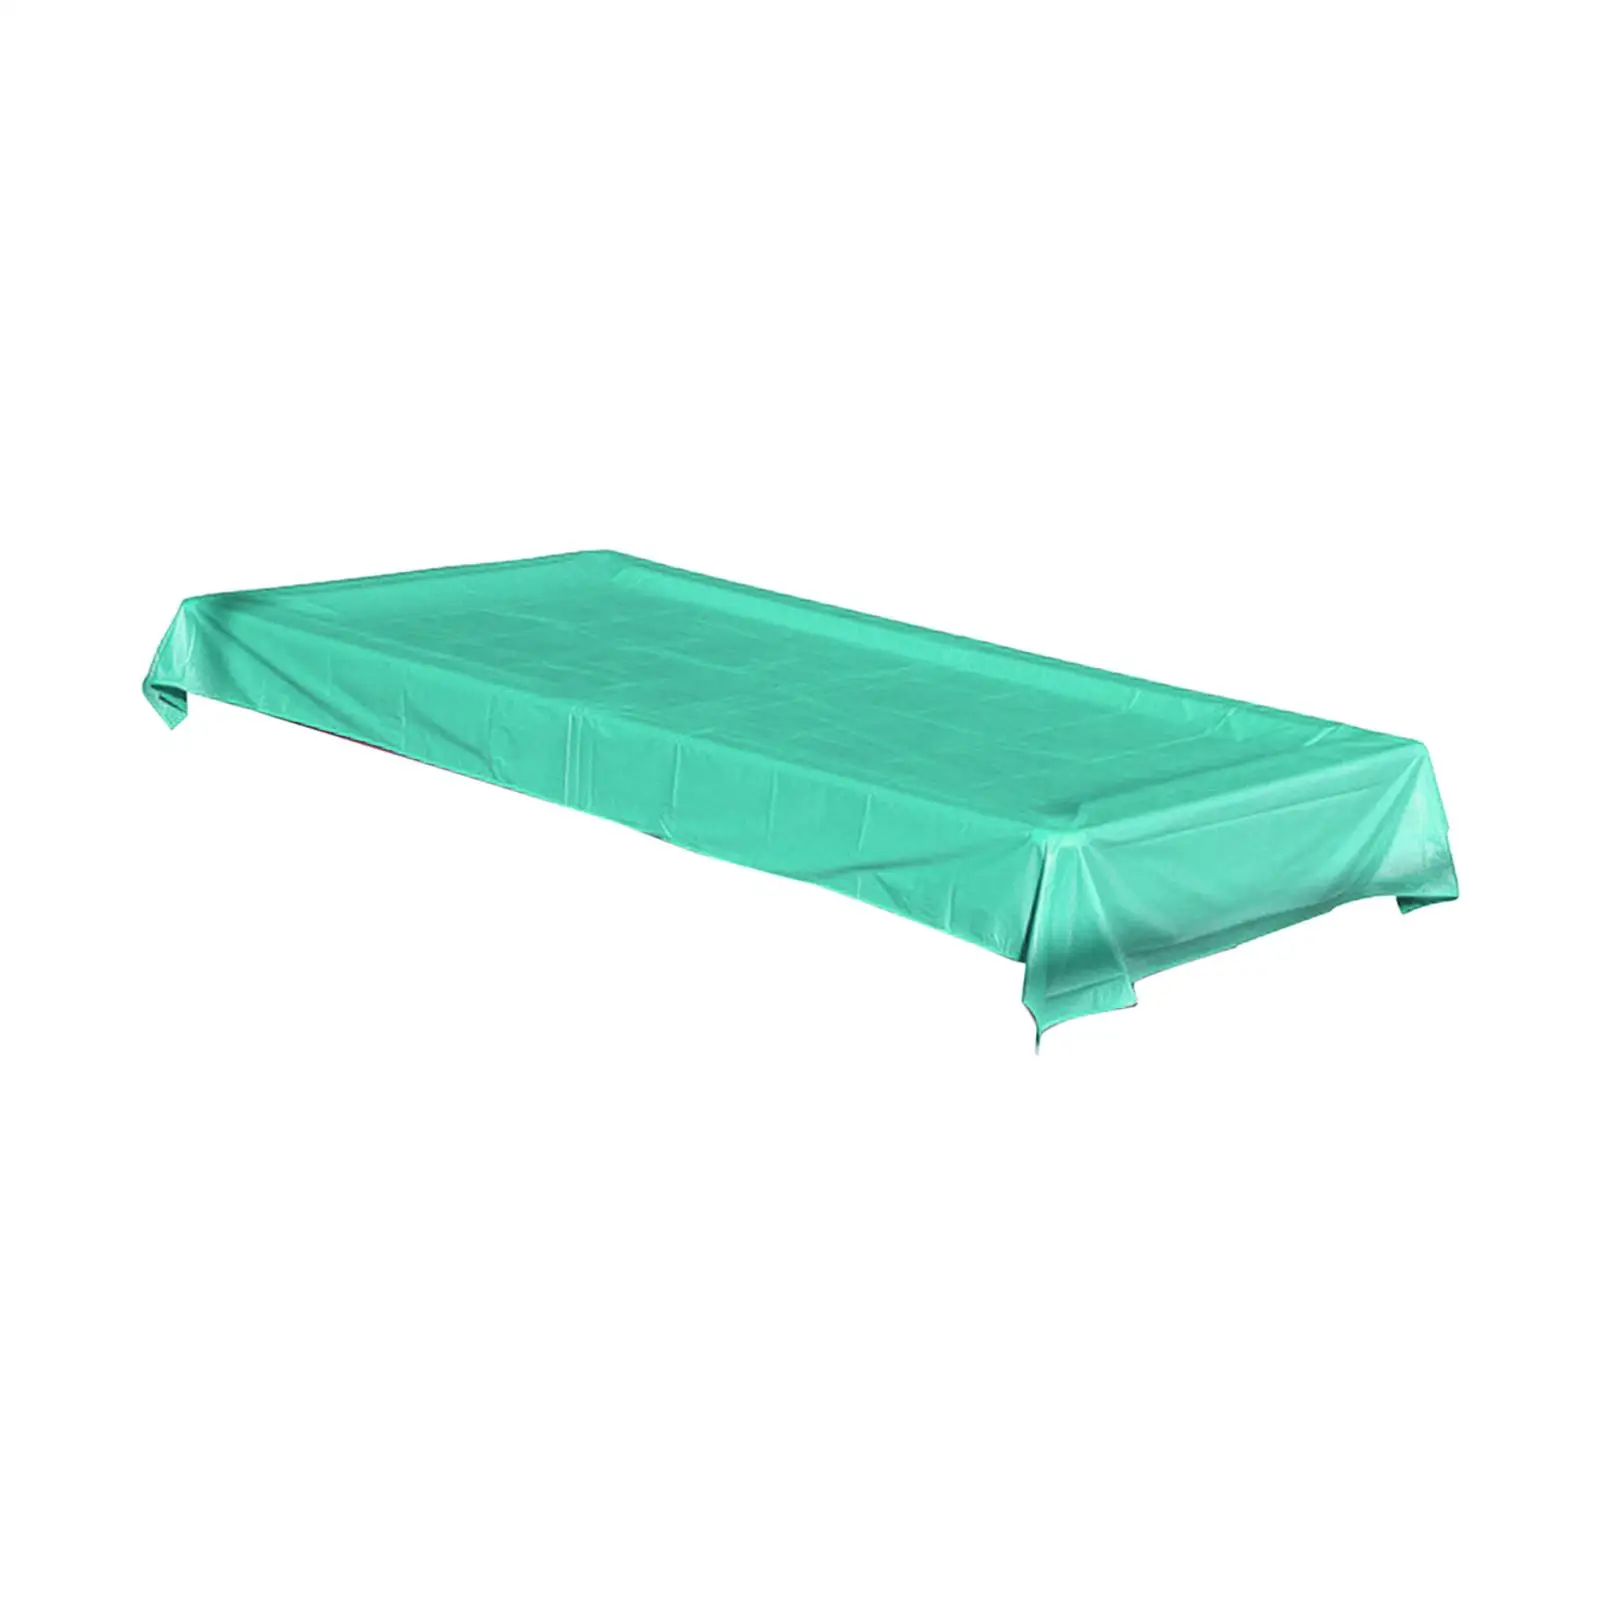 Pool Table Cover 8 ft Waterproof Heavy Duty Dustproof Portable for Entertainment